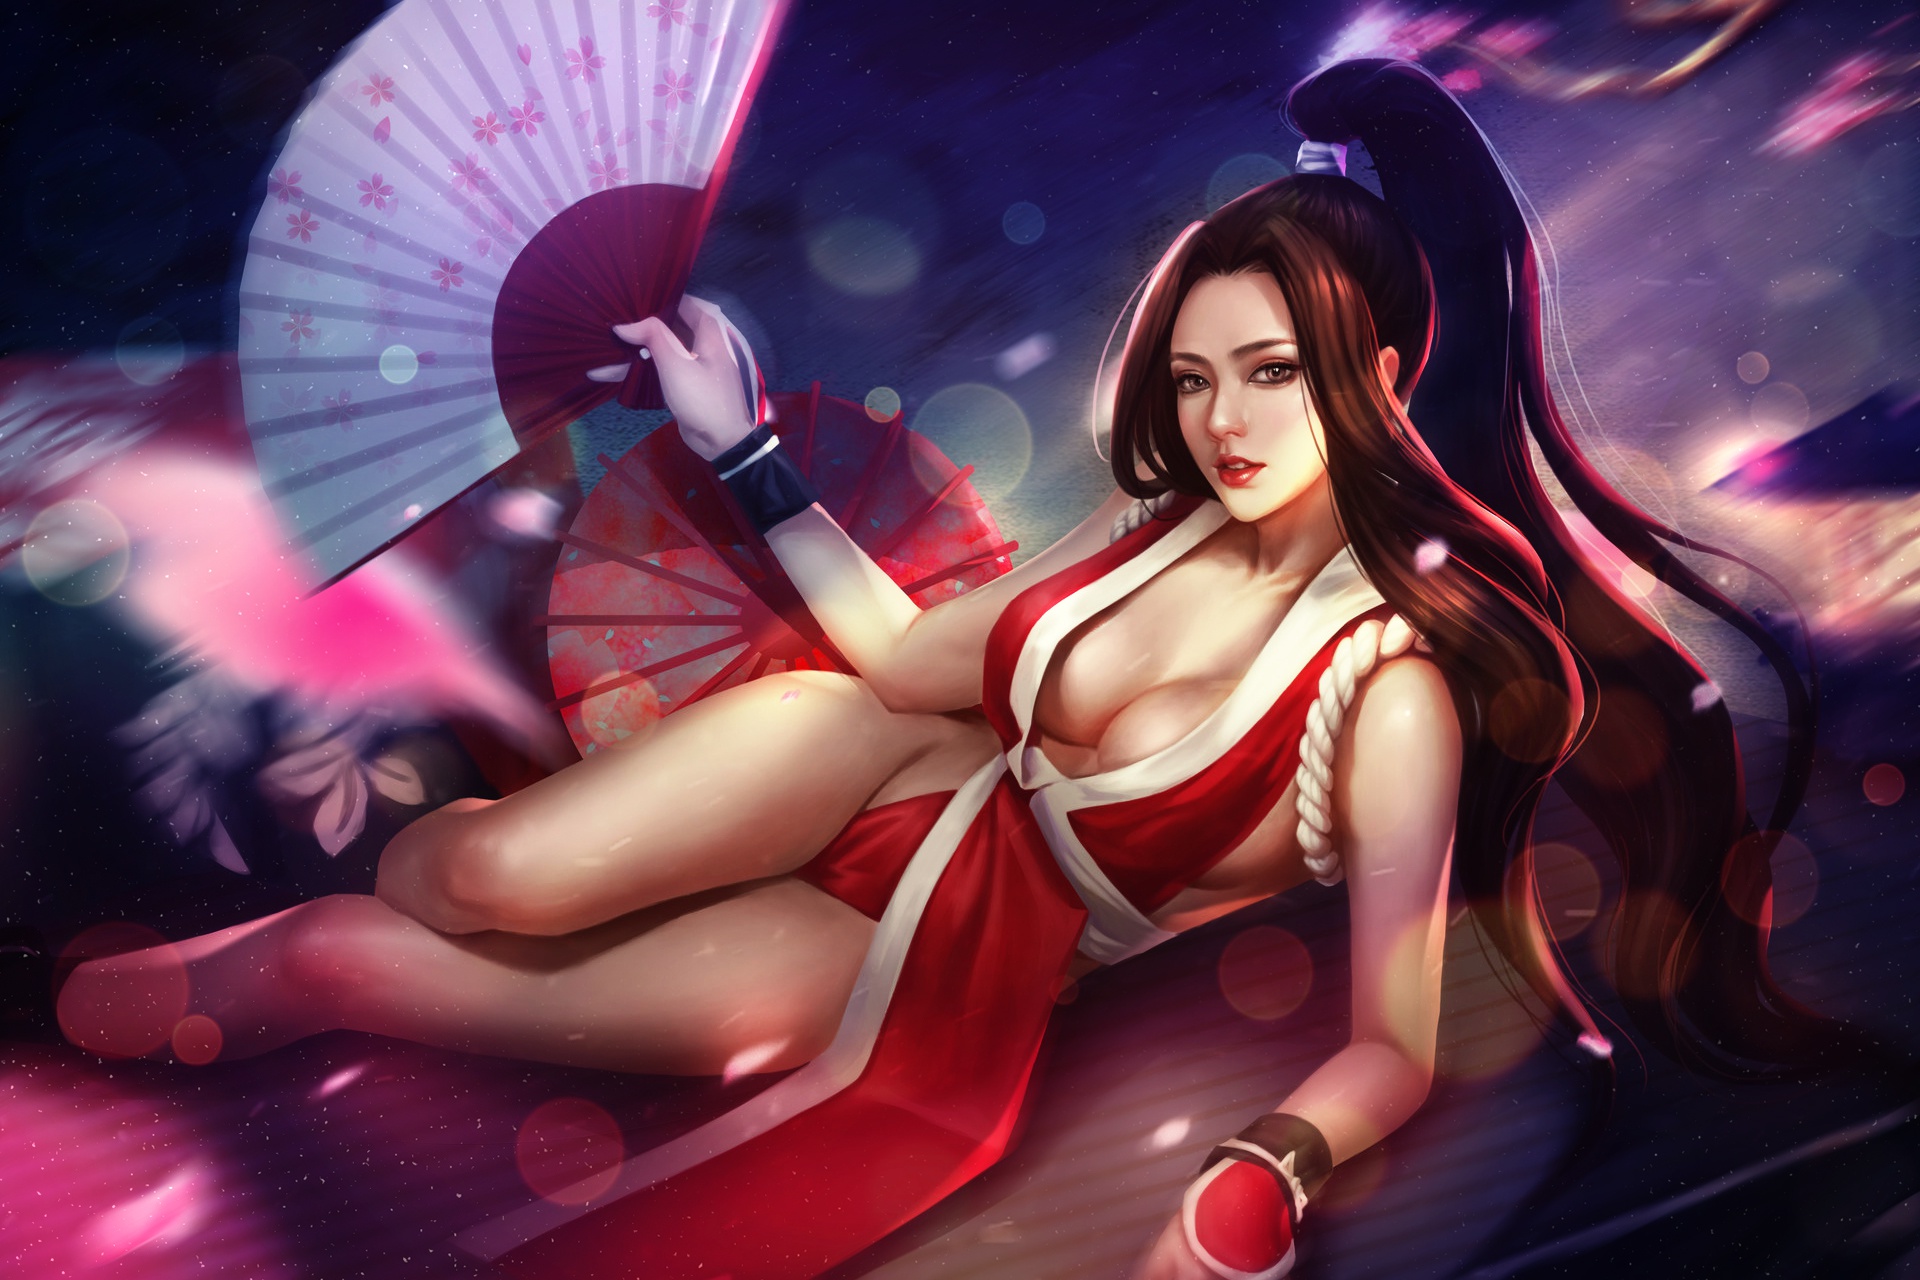 General 1920x1280 fantasy art fantasy girl boobs legs redhead long hair Mai Shiranui King of Fighters cleavage fans video games video game girls video game warriors looking at viewer red lipstick Fatal Fury